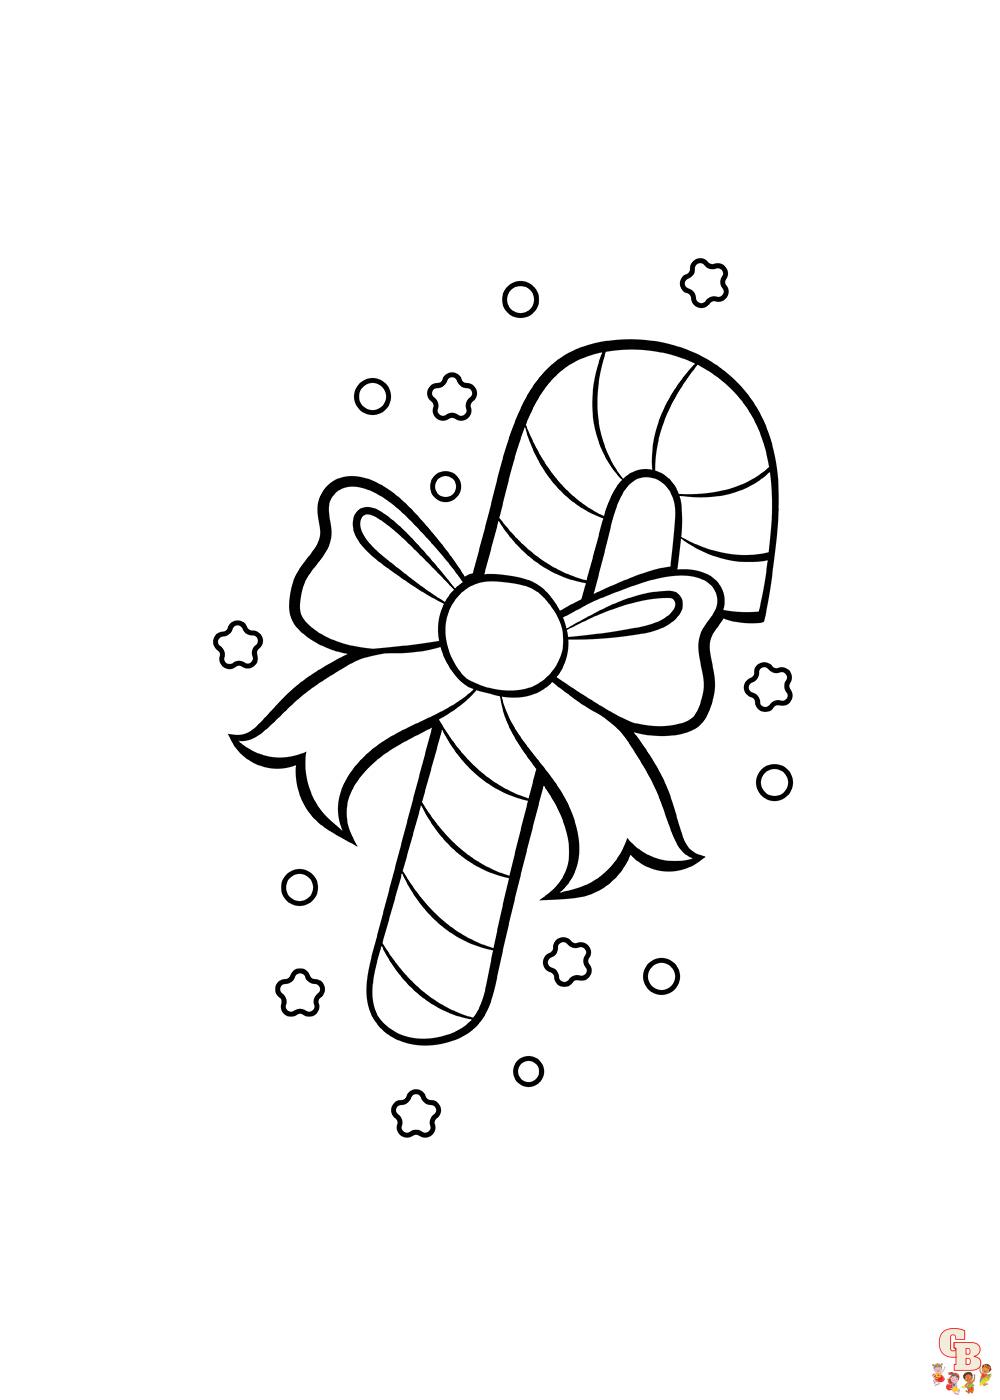 free christmas coloring pages to print